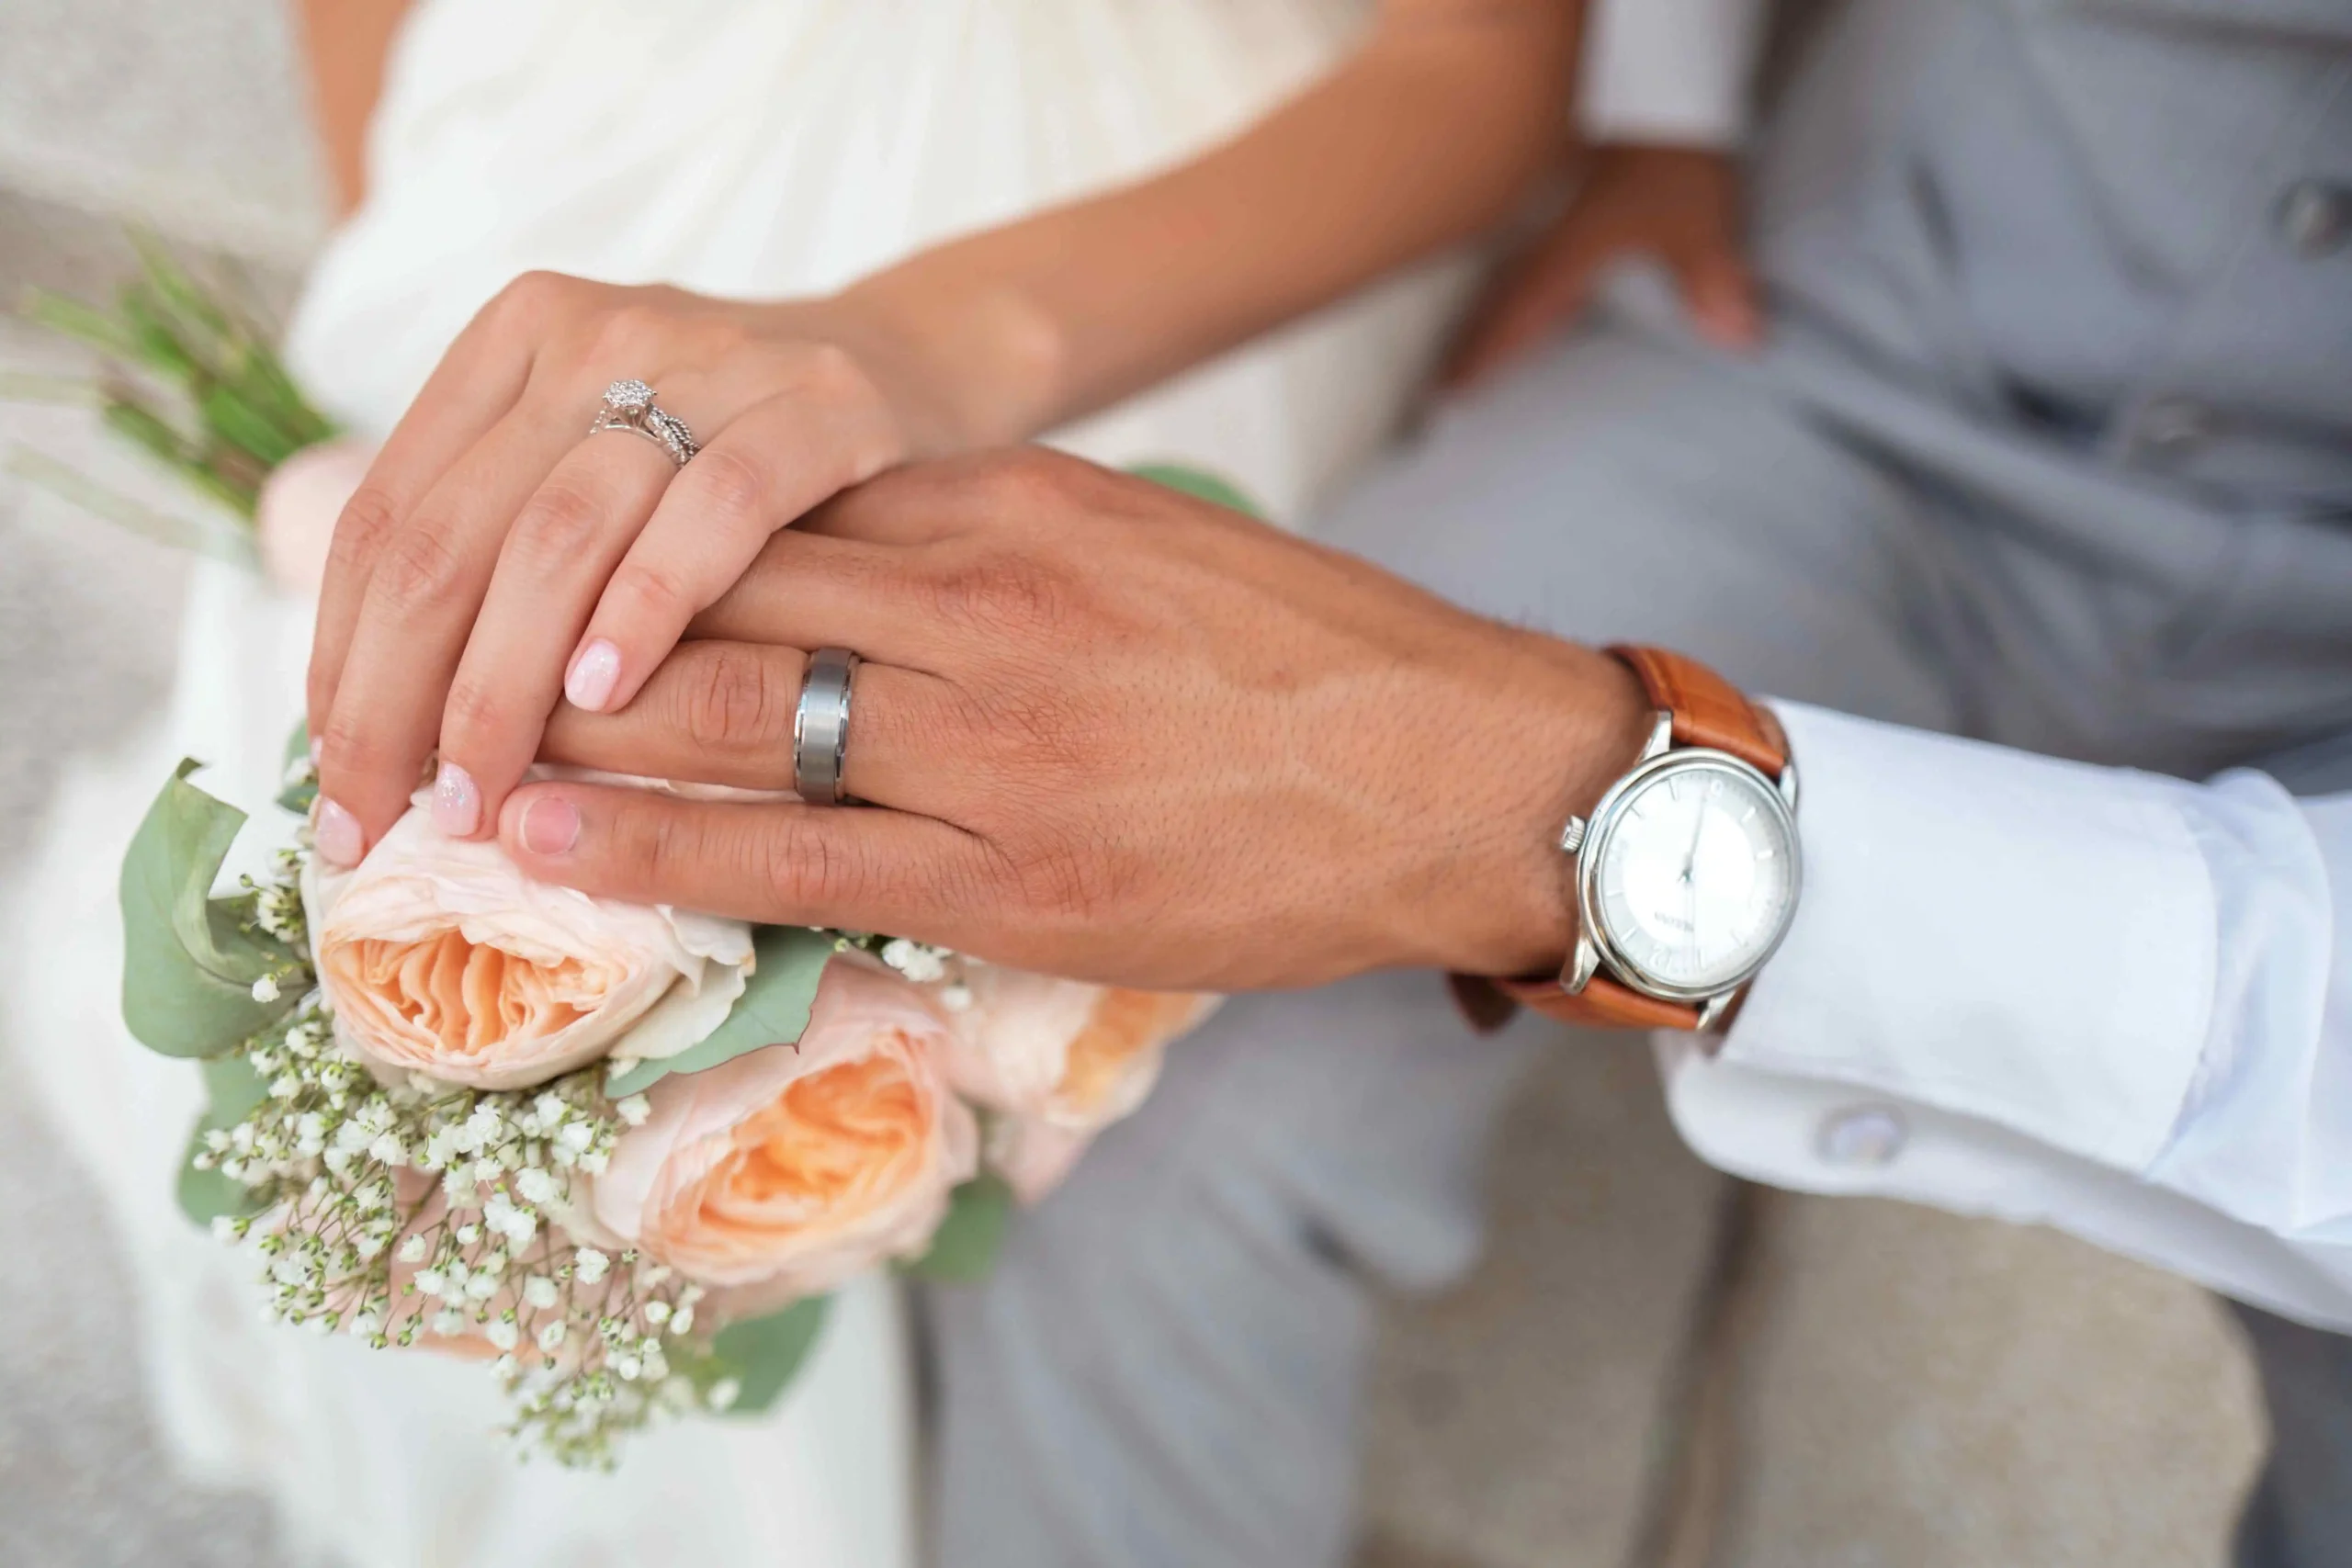  Clasped hands of bride and groom 
